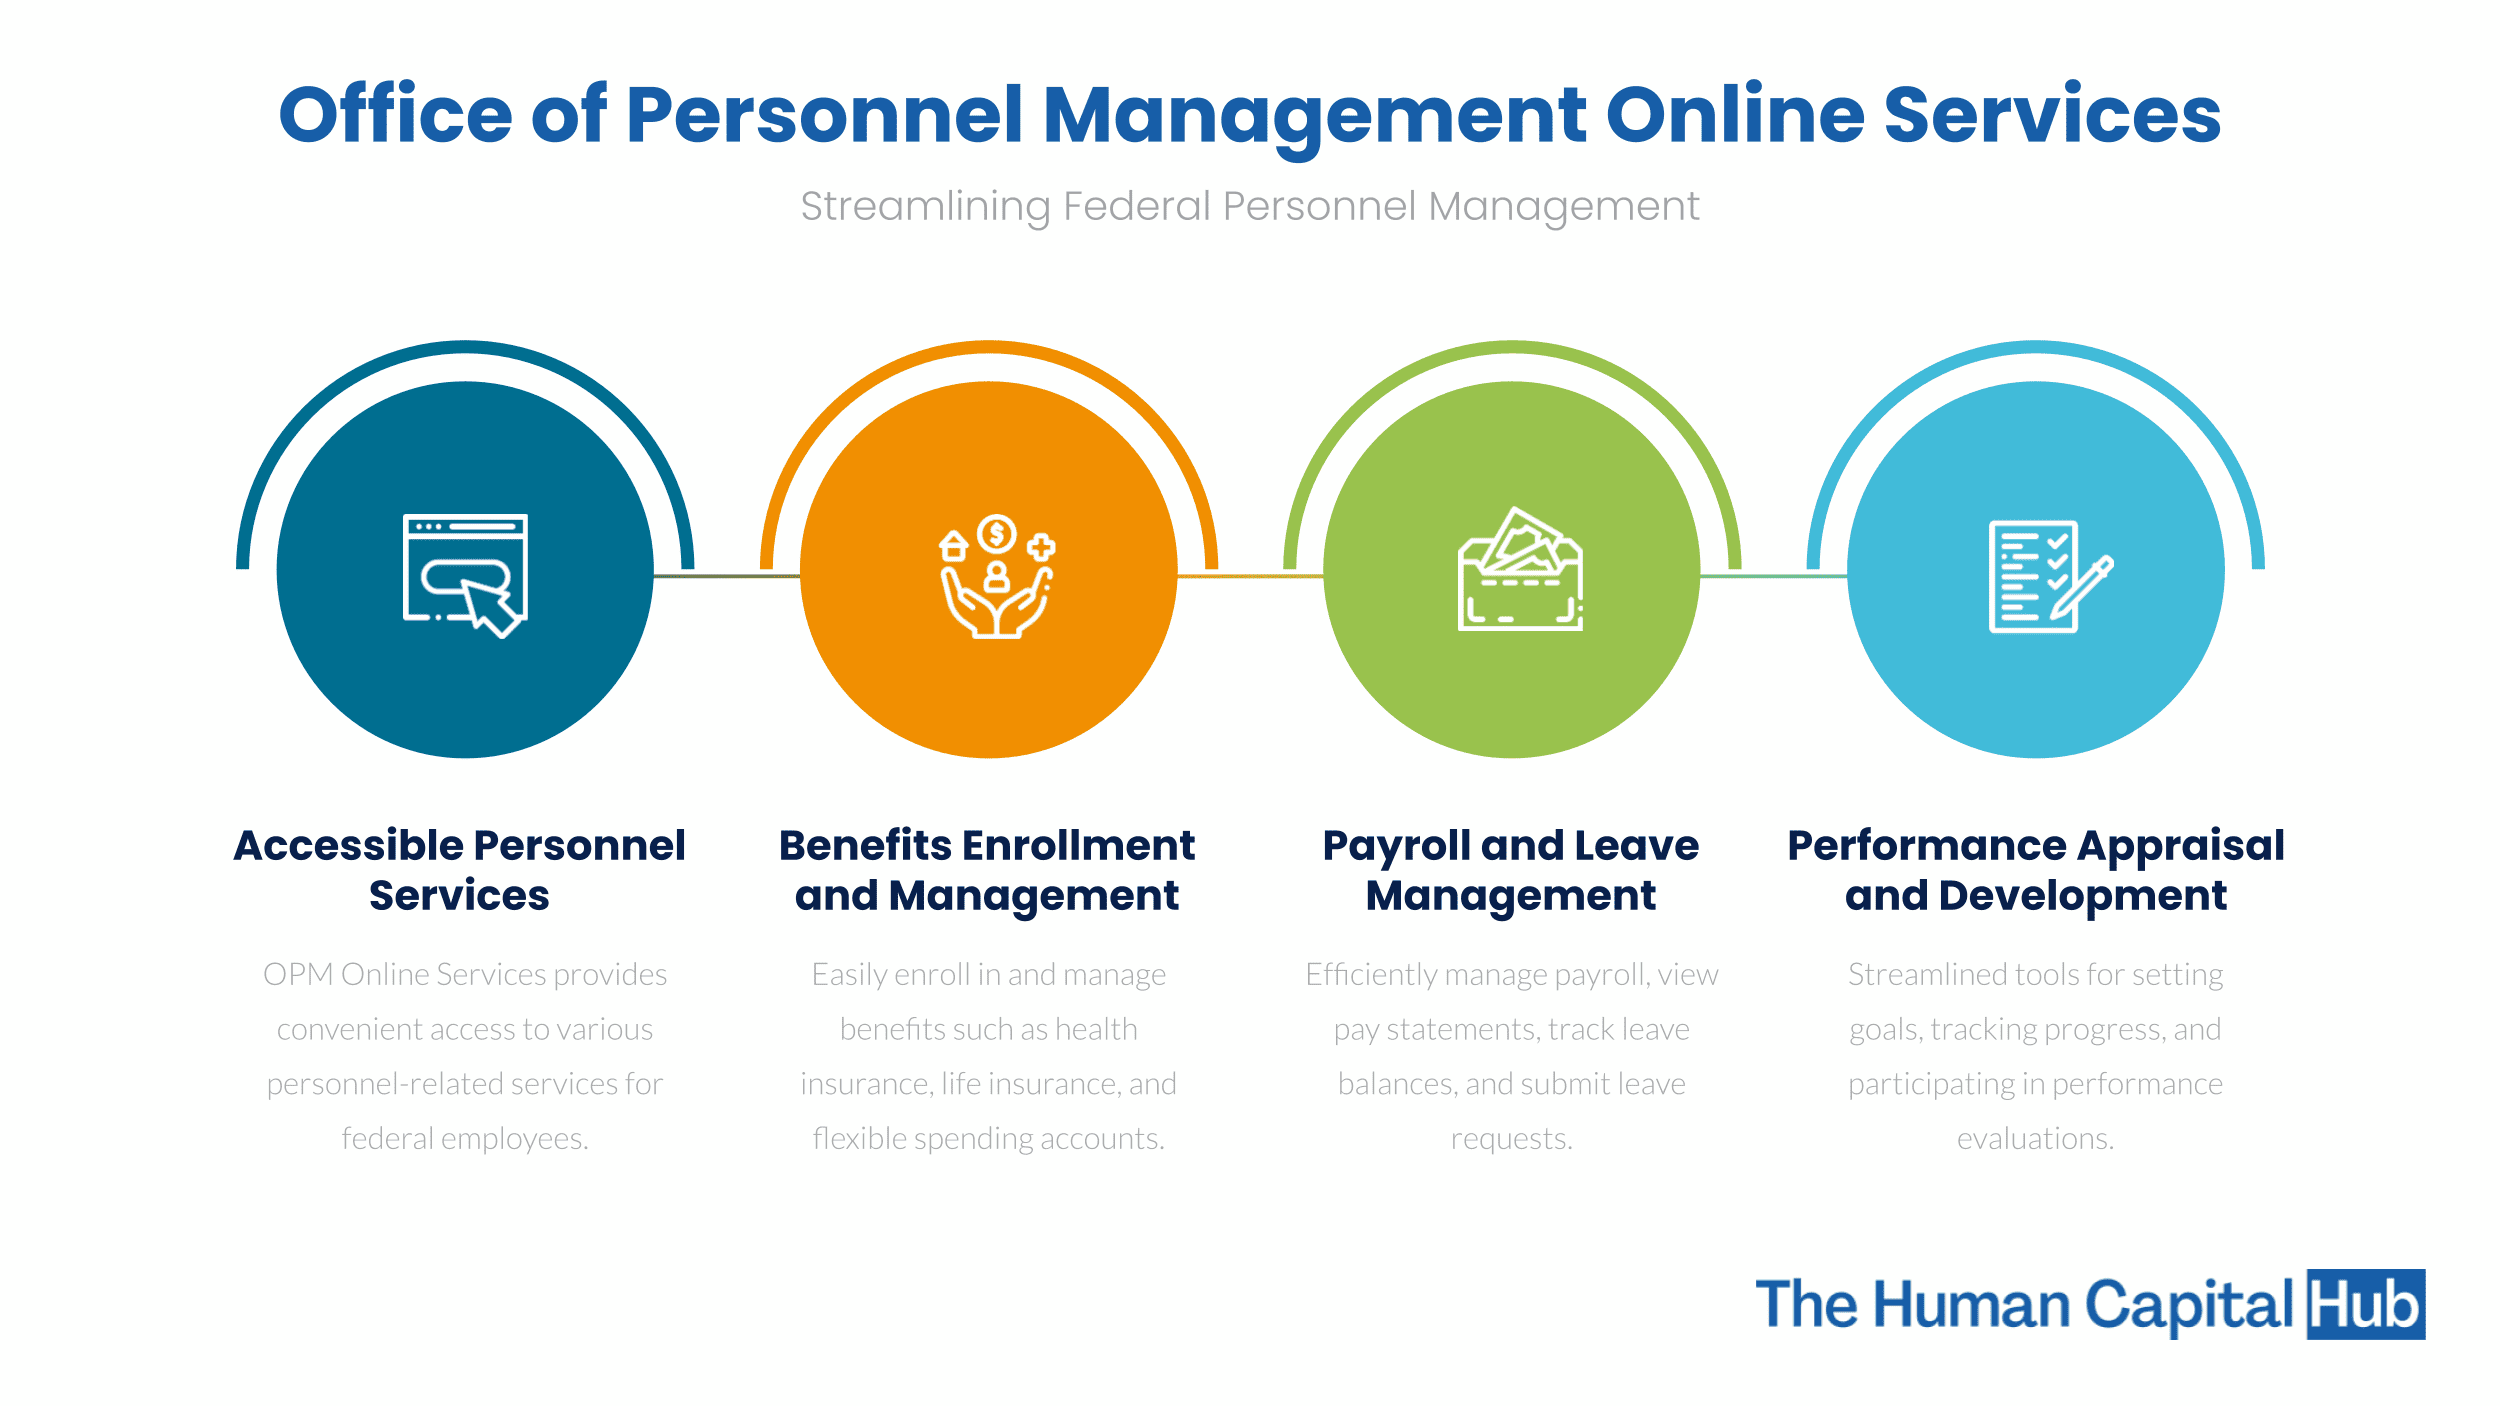 Office of Personnel Management Online Services: What You Need to Know